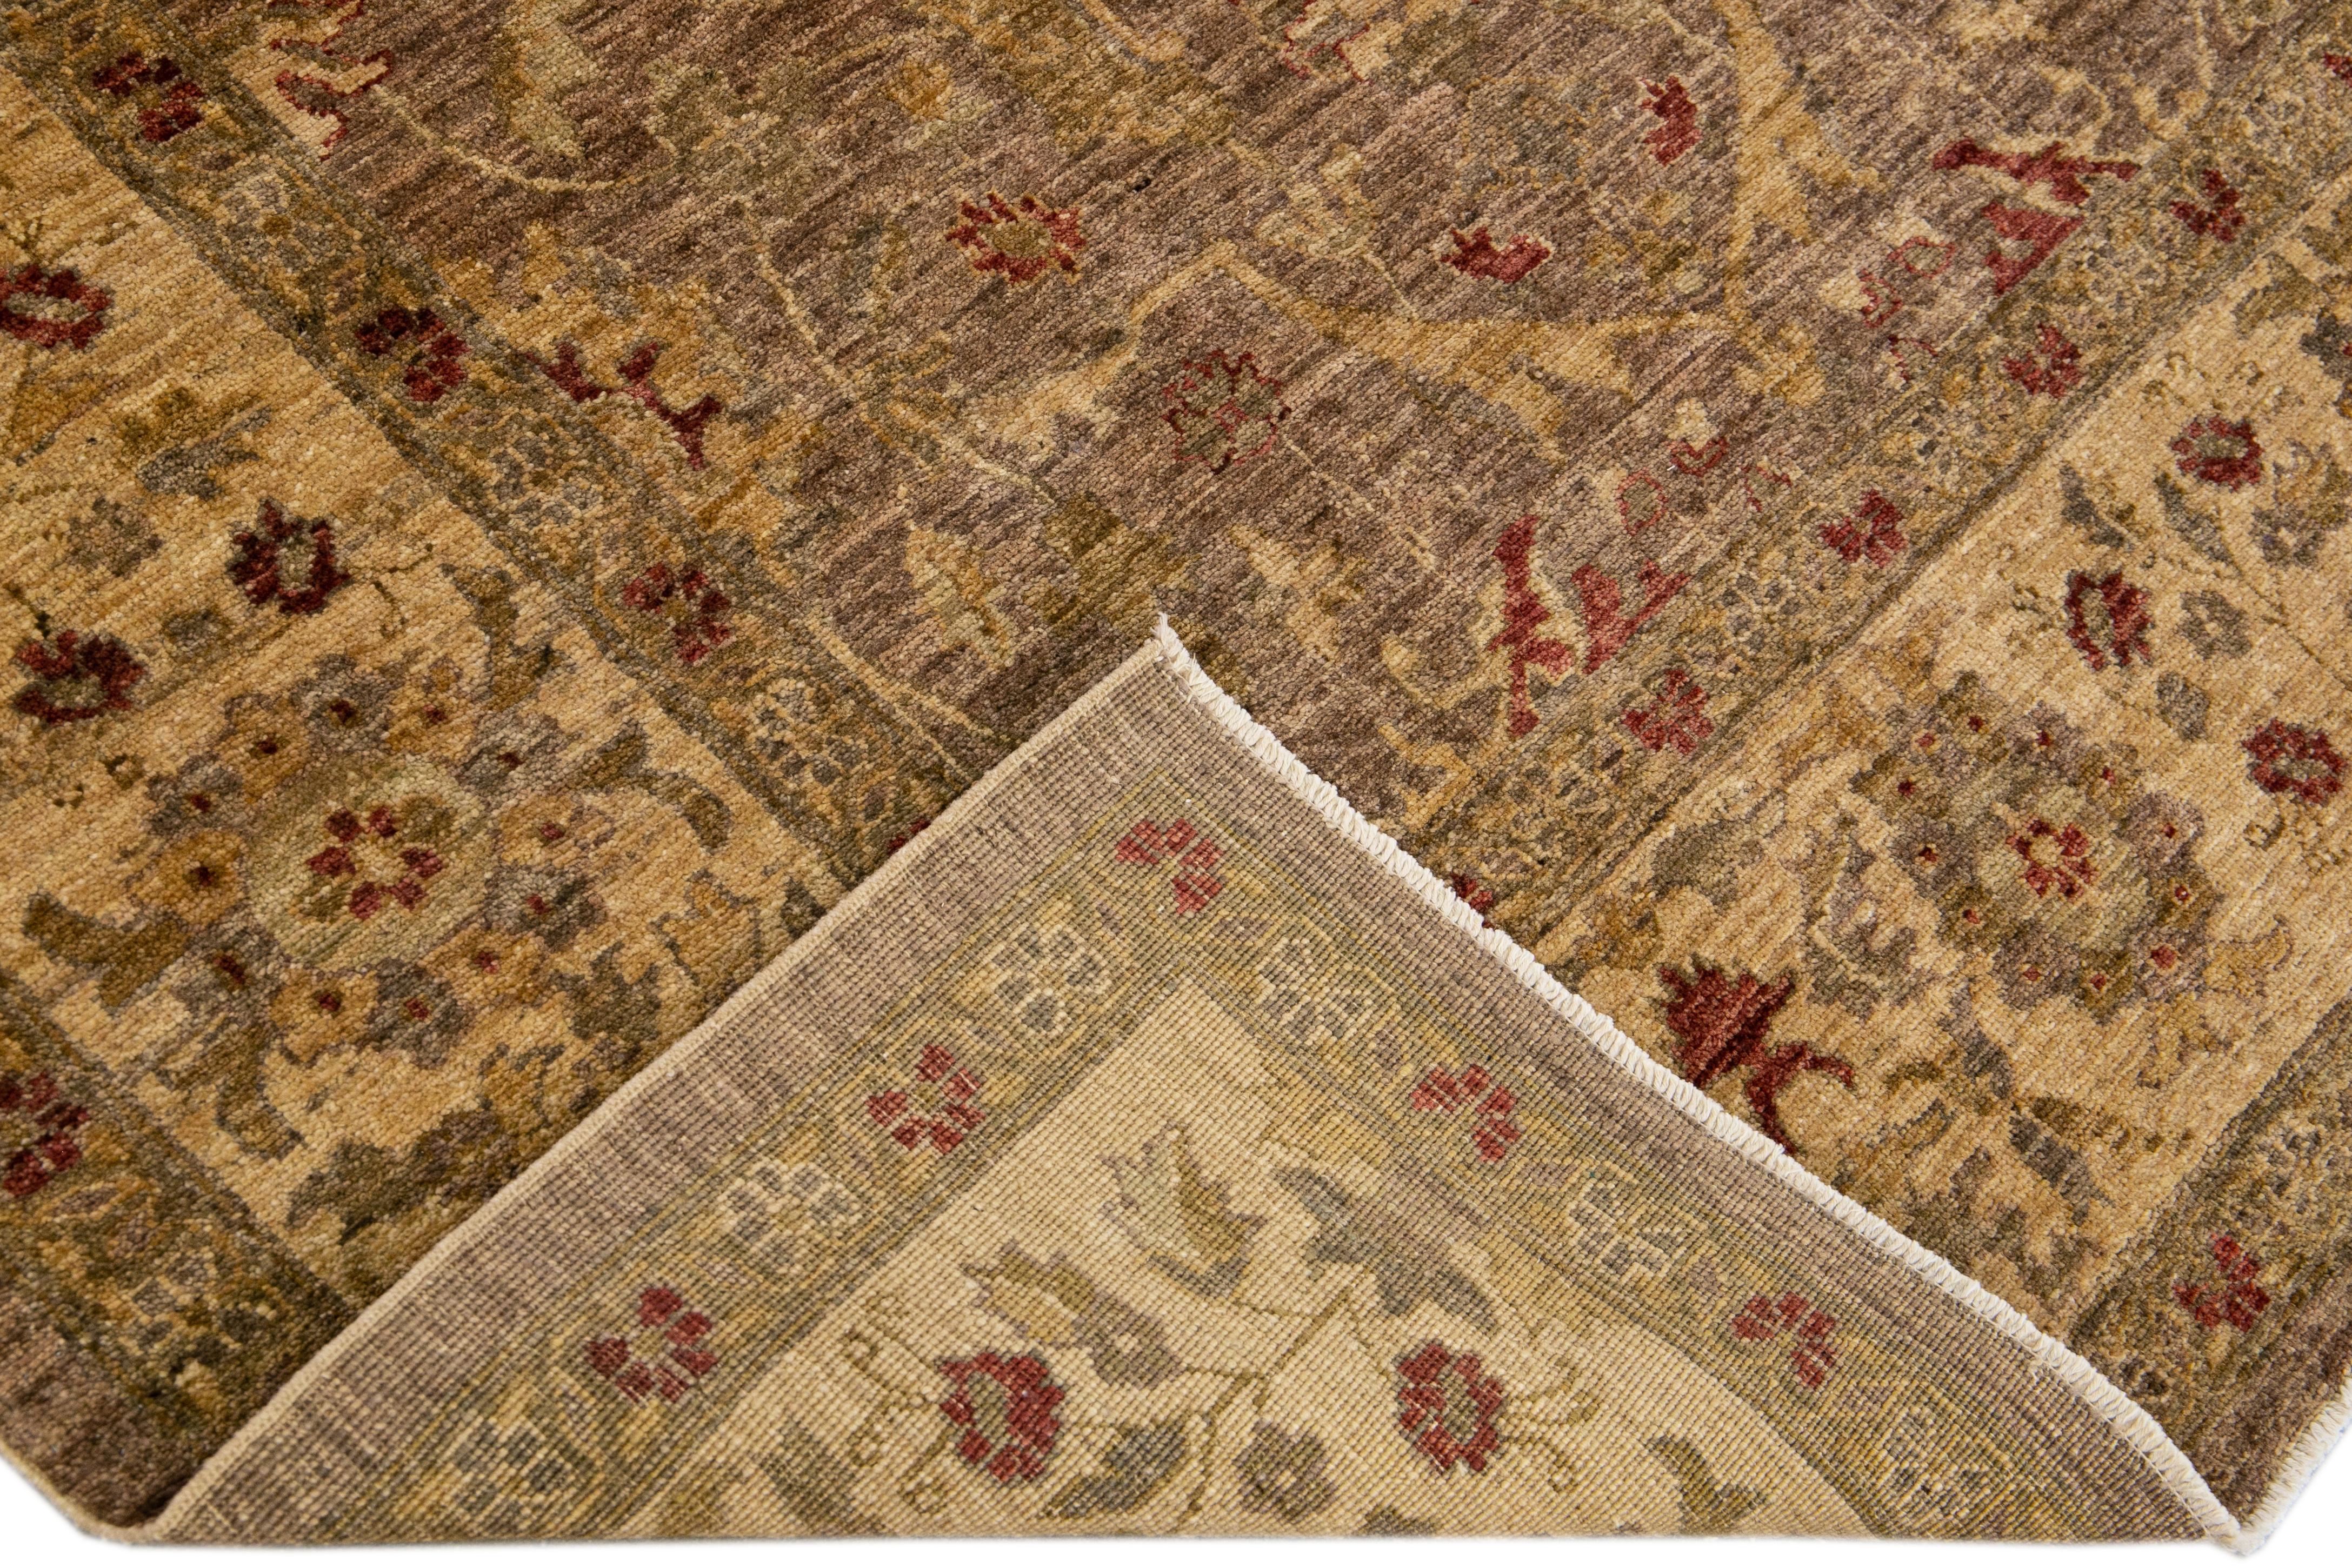 Beautiful oversize Paki Peshawar hand-knotted wool rug with a brown field. This modern rug has gray, beige, and red accents in a gorgeous all-over Classic vine scroll and a palmettes motif.

This rug measures: 8'4